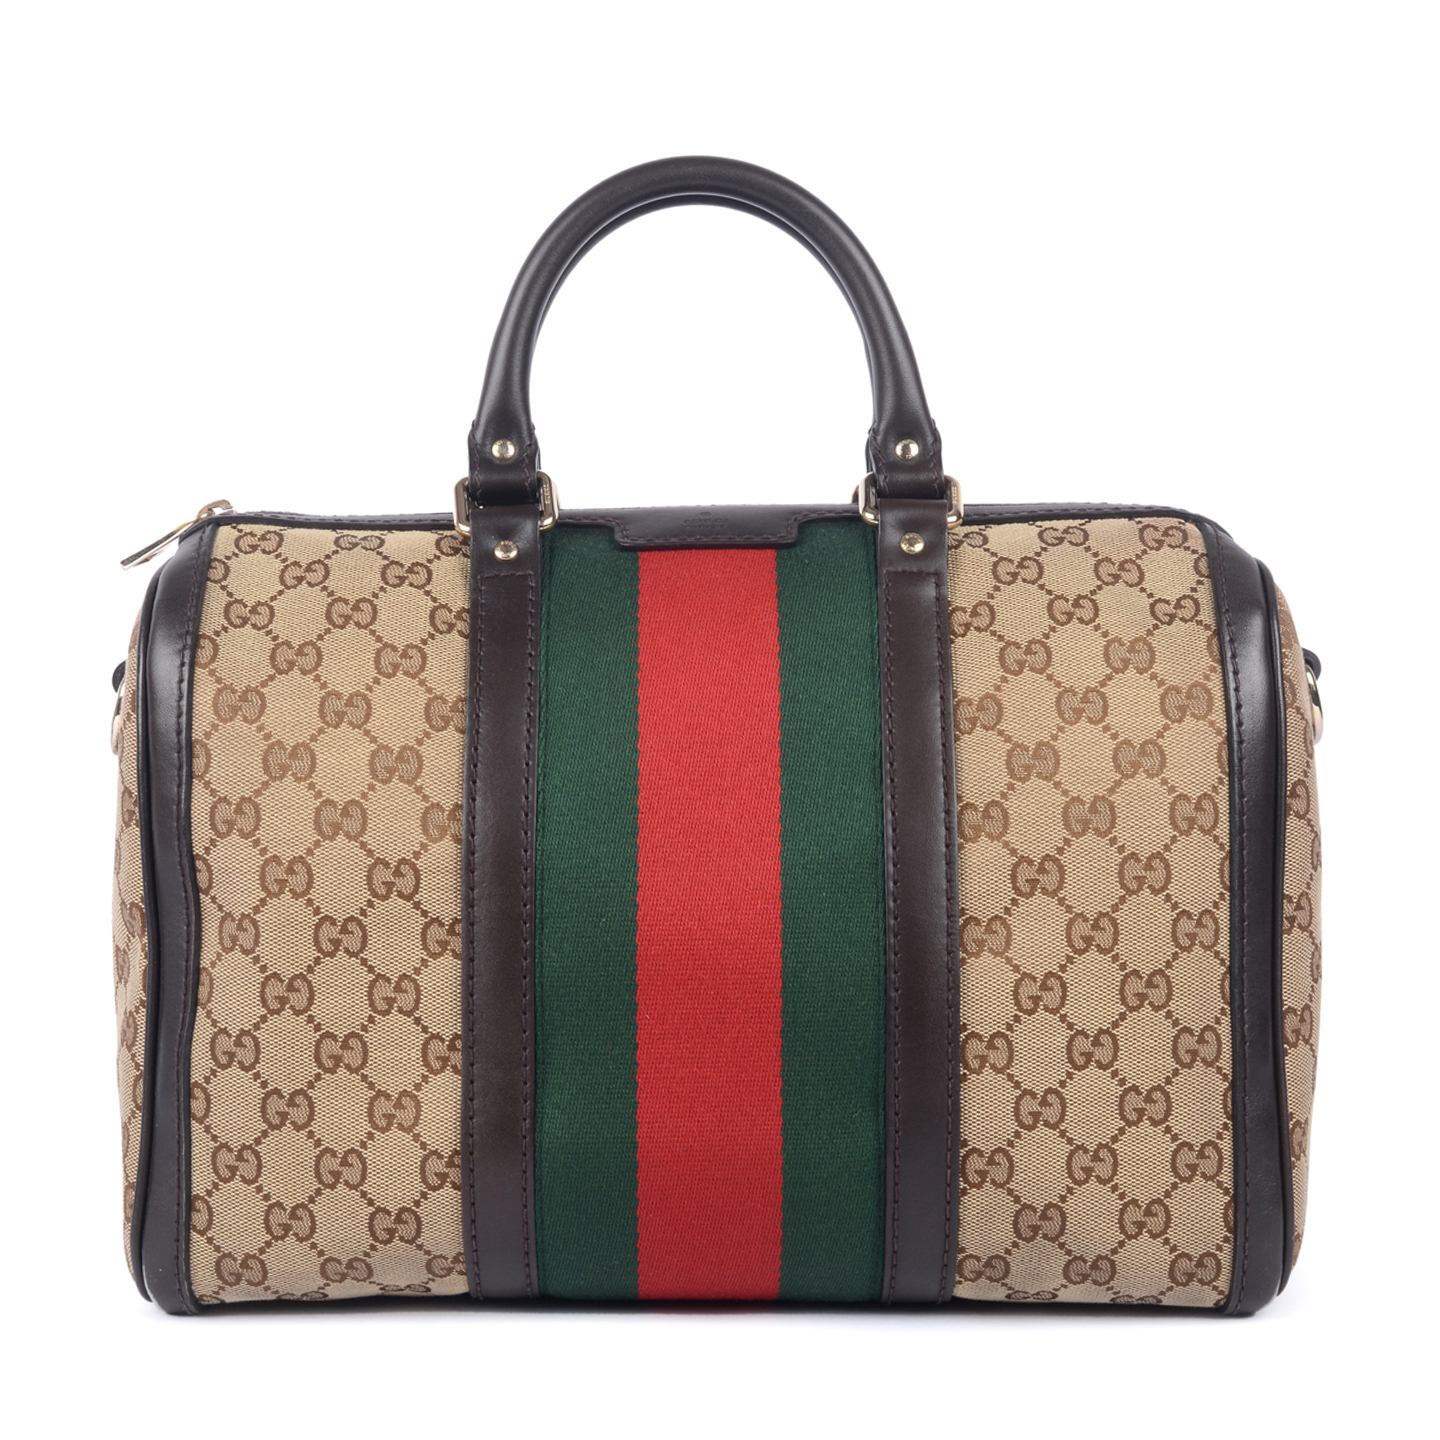 Gucci Ladies Bags In India | Literacy Ontario Central South